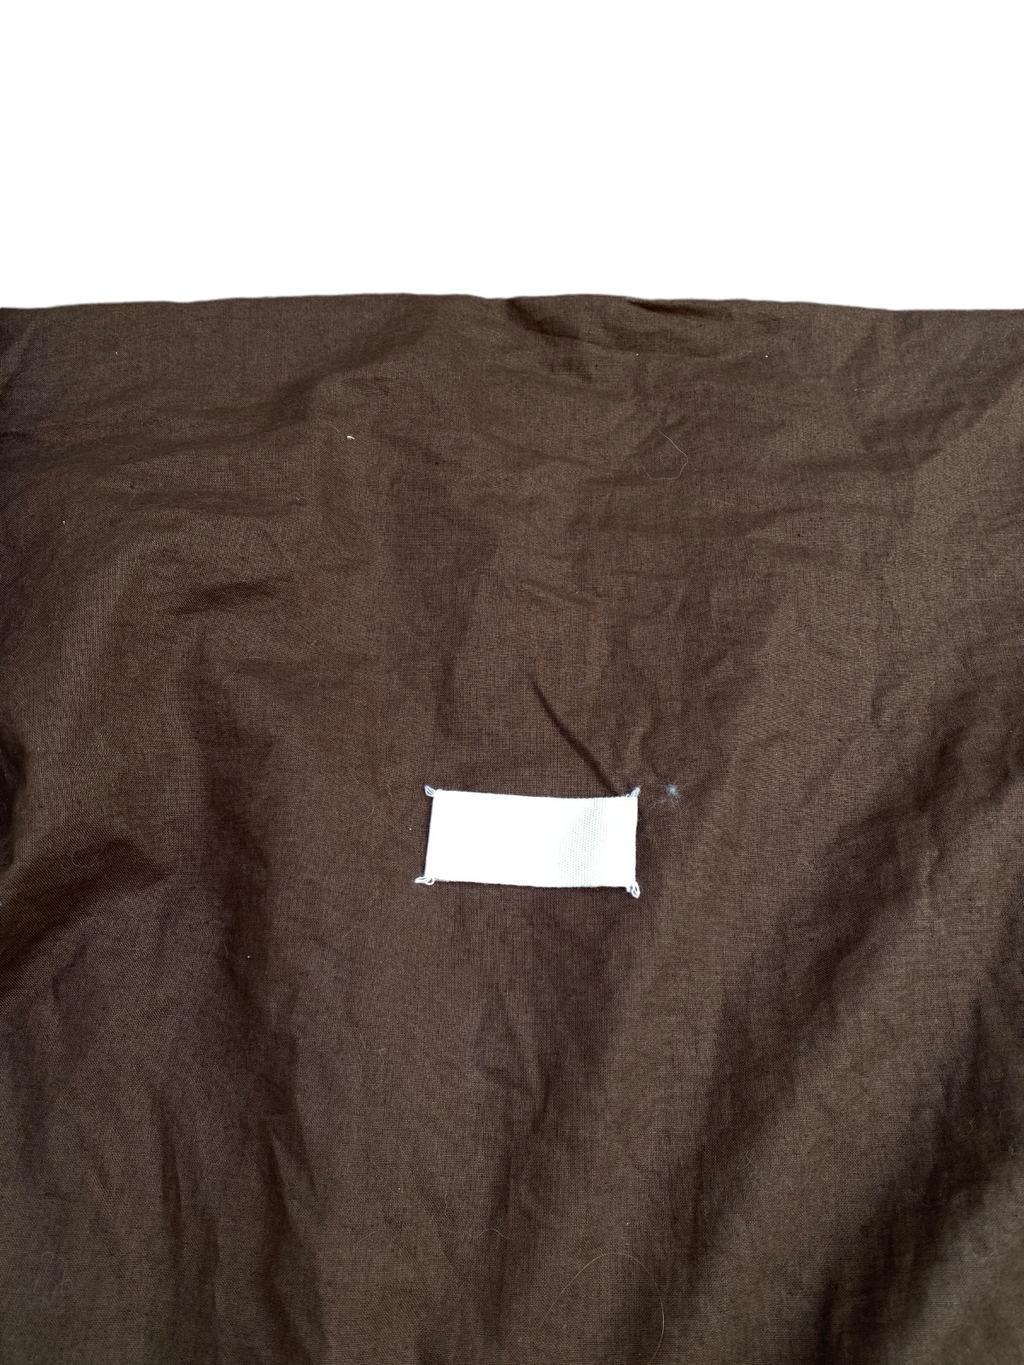 Extremely Rare  FW 2000 Brown Wool Duvet Cover